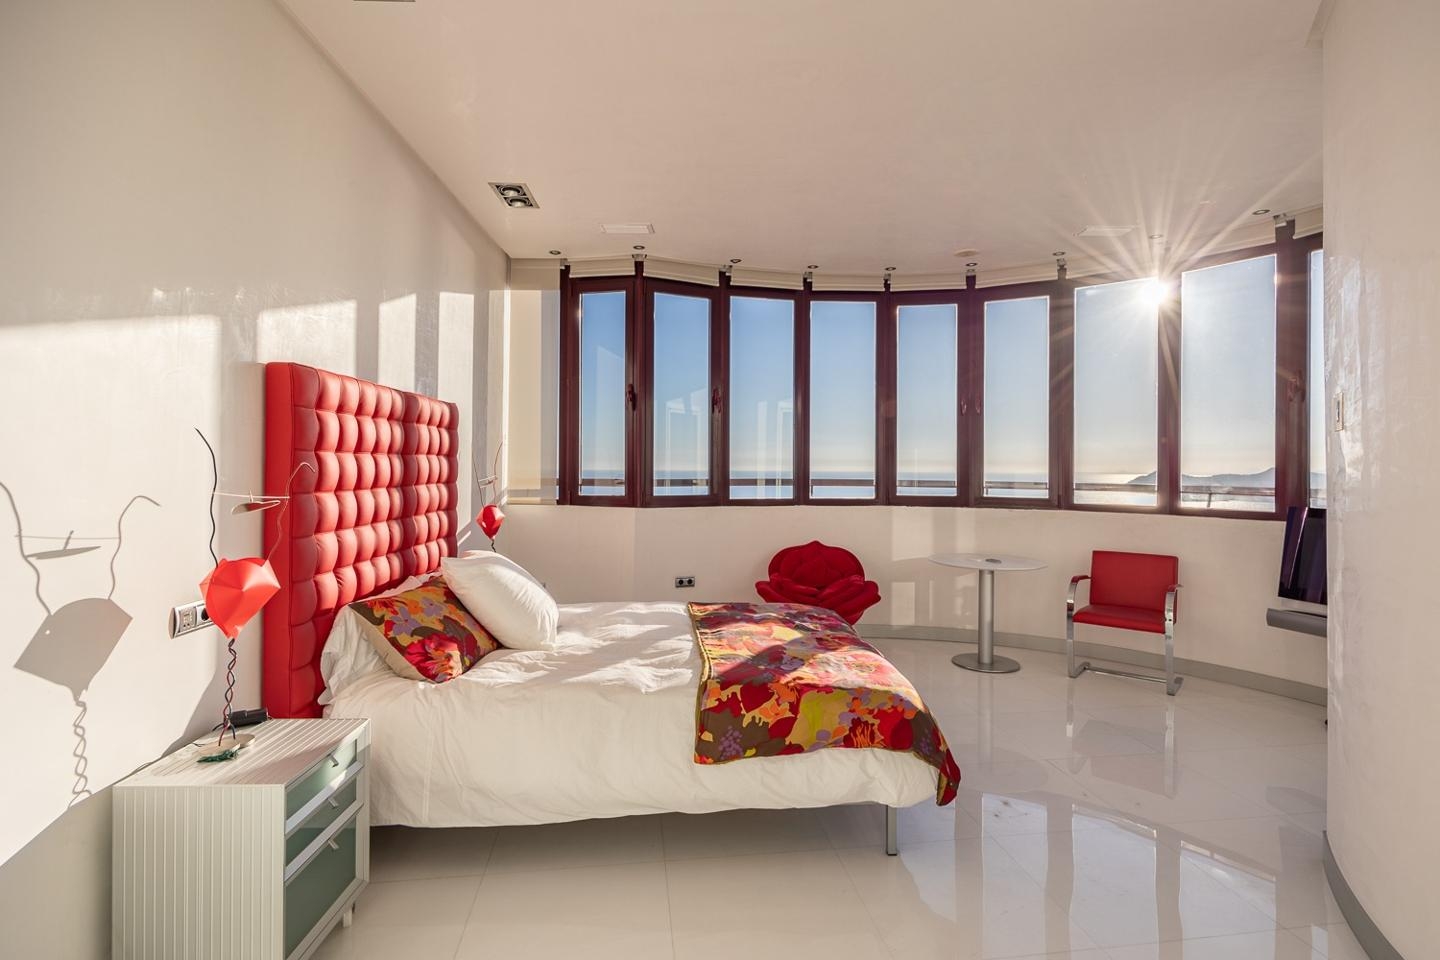 This flat is at Benidorm, , on floor 36. It is a flat that has 152 m2 of which 151